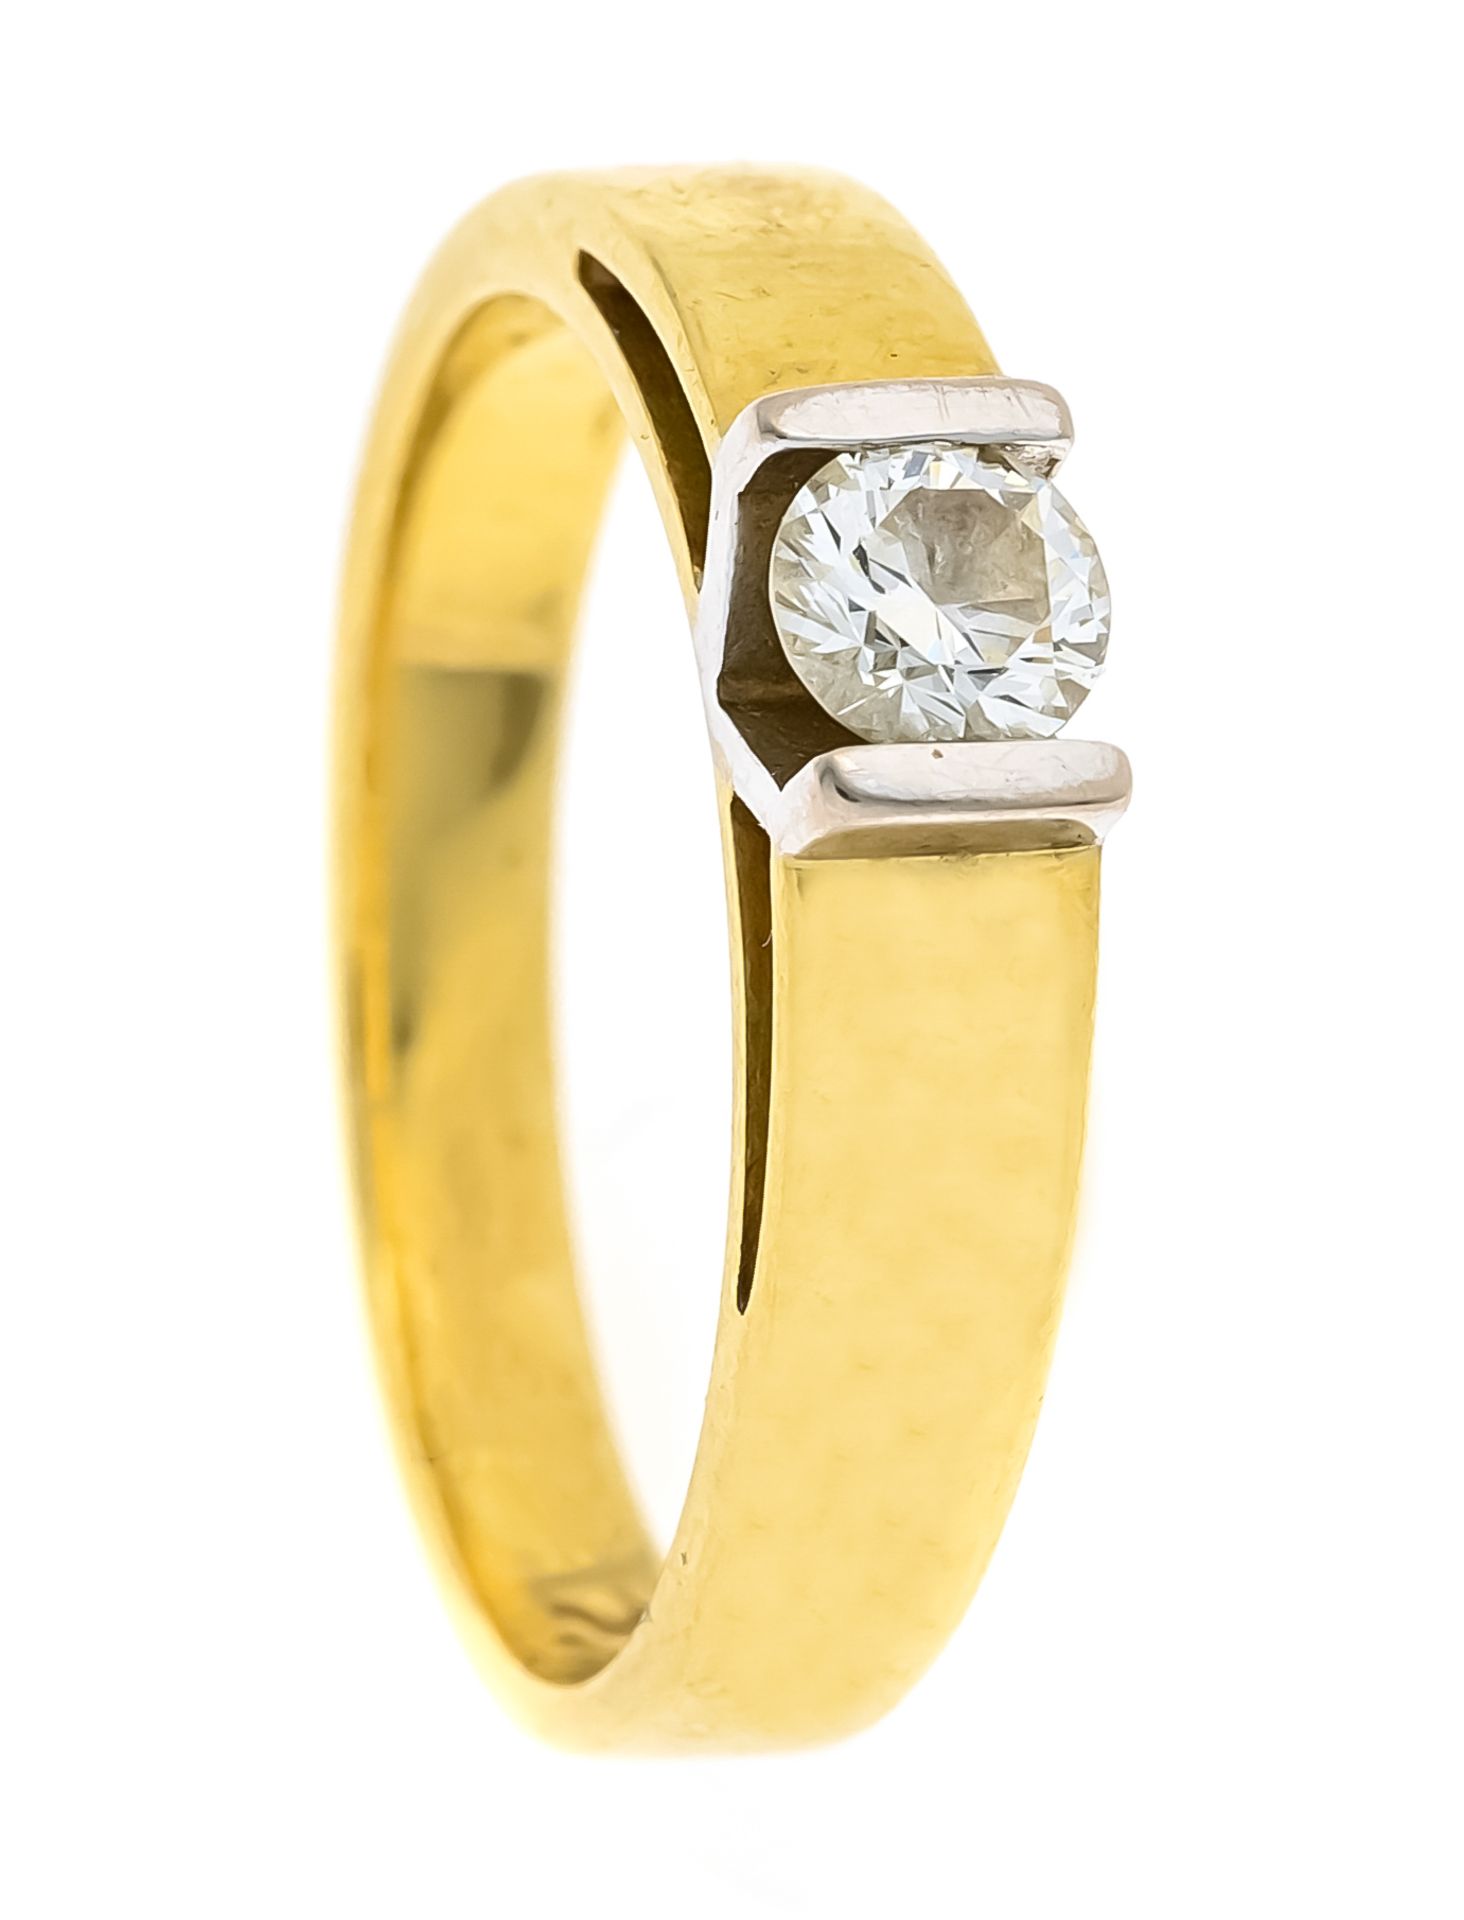 Solitaire diamond ring 750/000 with one diamond 0.25ct hallmarked tinted W/SI, RG 49, 3.7 g